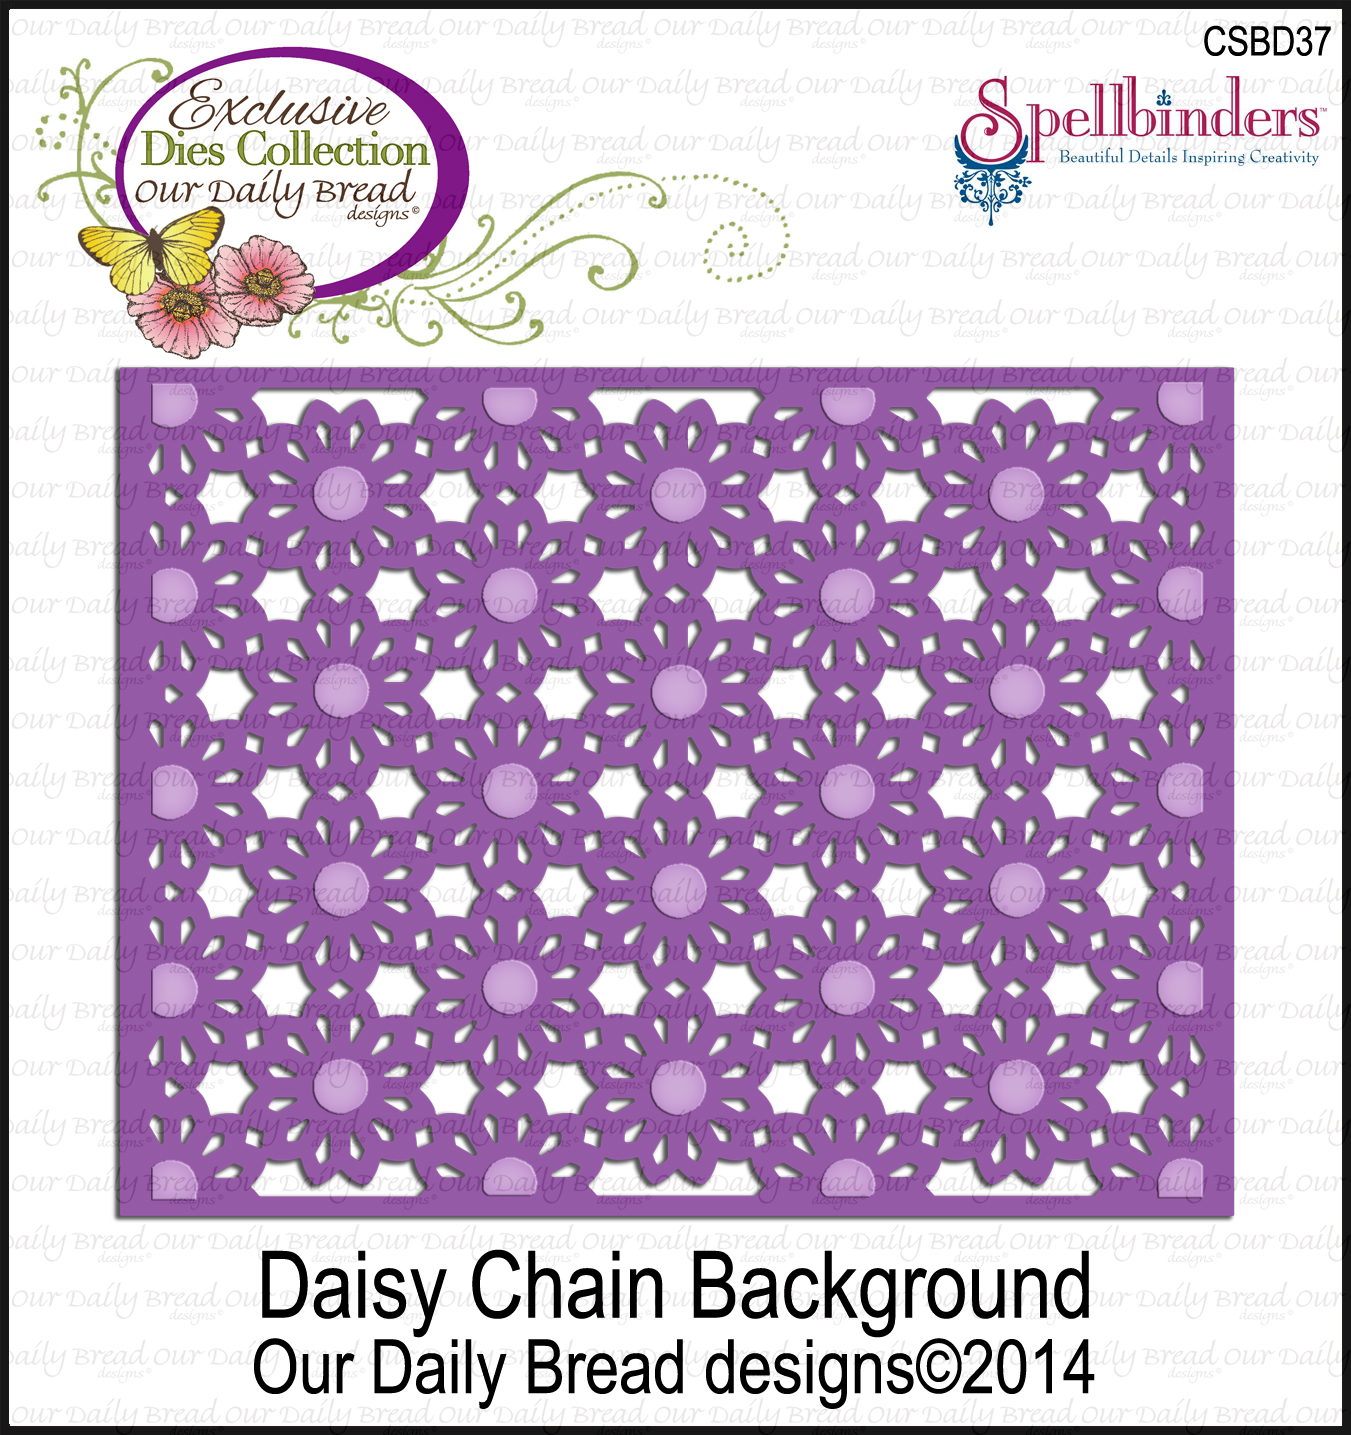 http://www.ourdailybreaddesigns.com/index.php/csbd37-daisy-chain-background-die.html